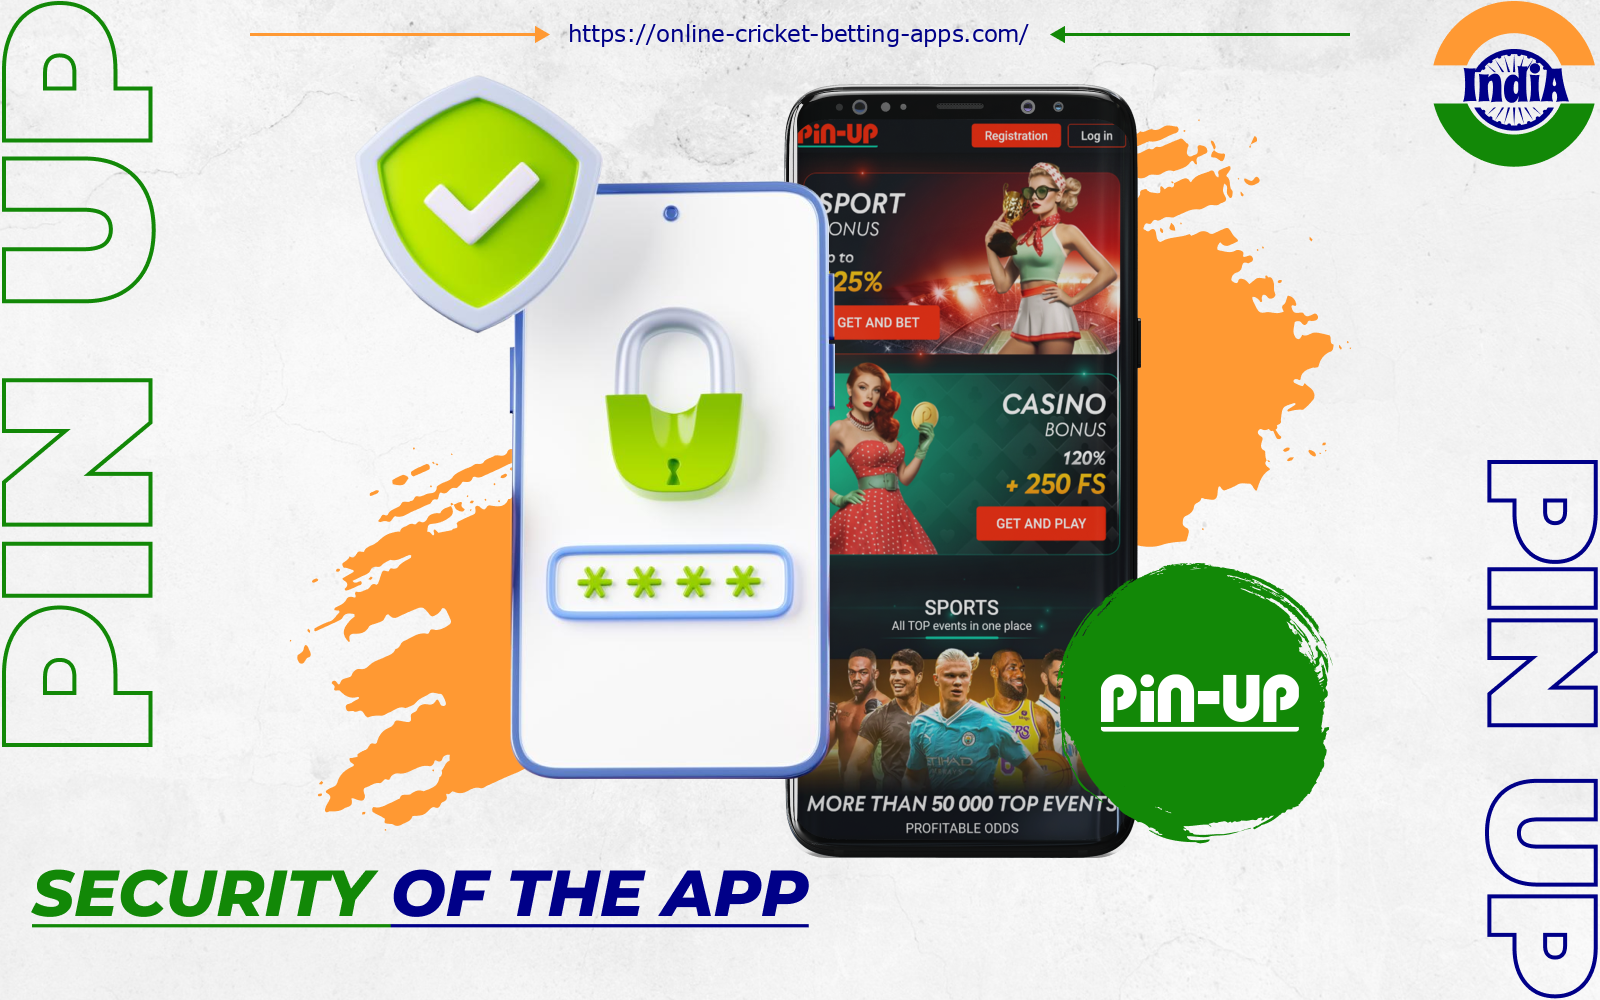 By downloading the Pin-Up app and using it to gamble, Indian players can rest assured that their account and balance are protected